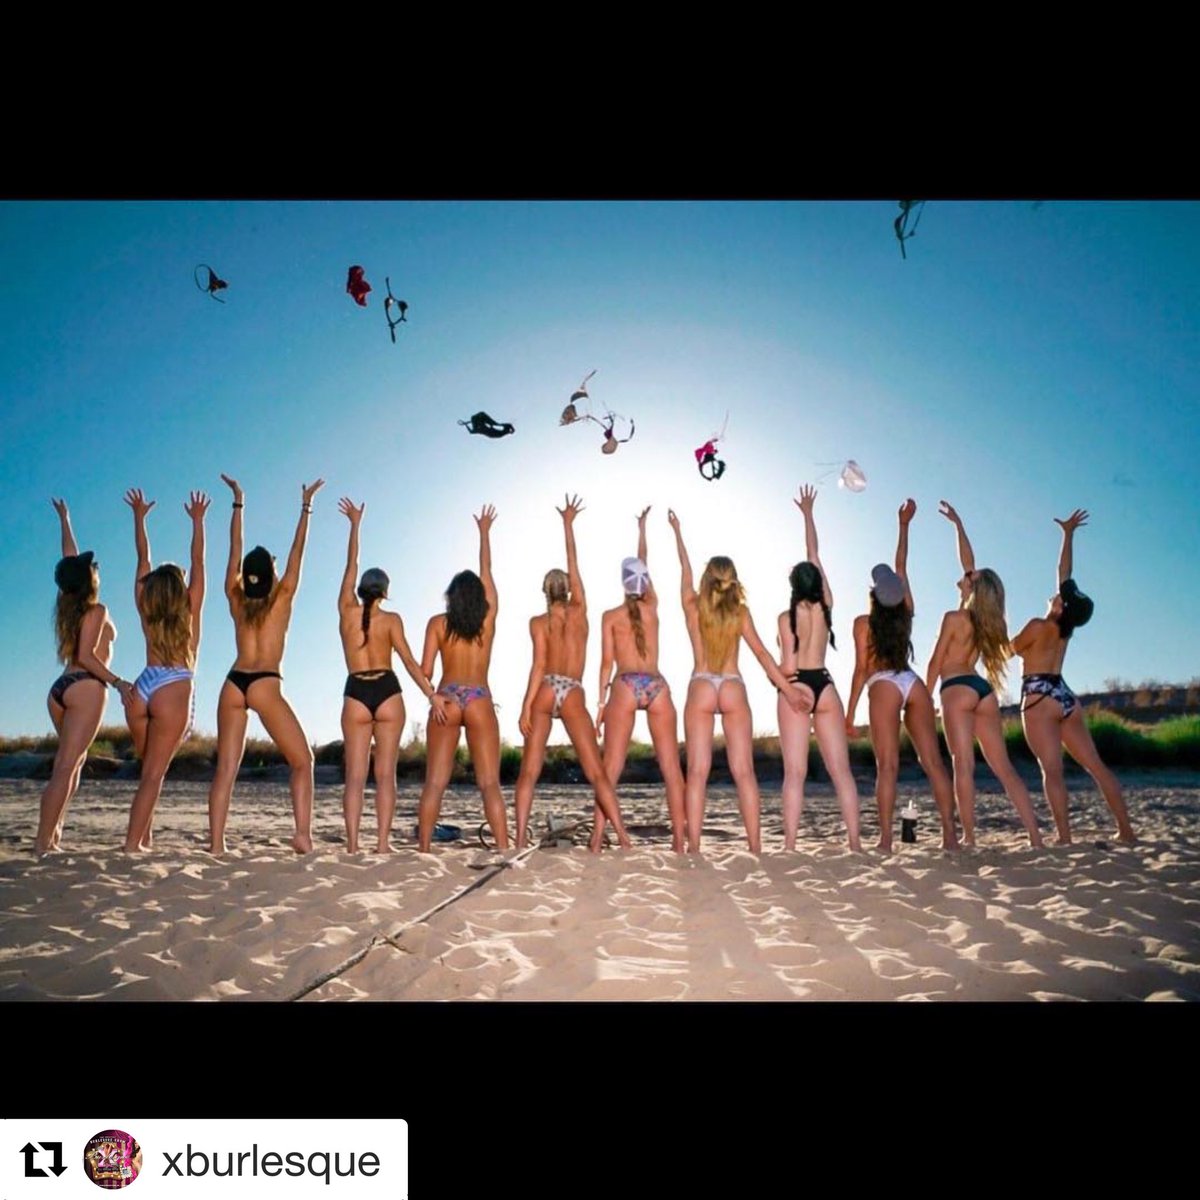 So thankful that I have the privilege to be apart of such an amazing company with some absolutely breath taking beautiful women who are such talented individuals. I love you all 💋🙌🏽💋
What a great day at our second annual “X” Yacht Party!  #xburlesque #water #topsoff #bikinis